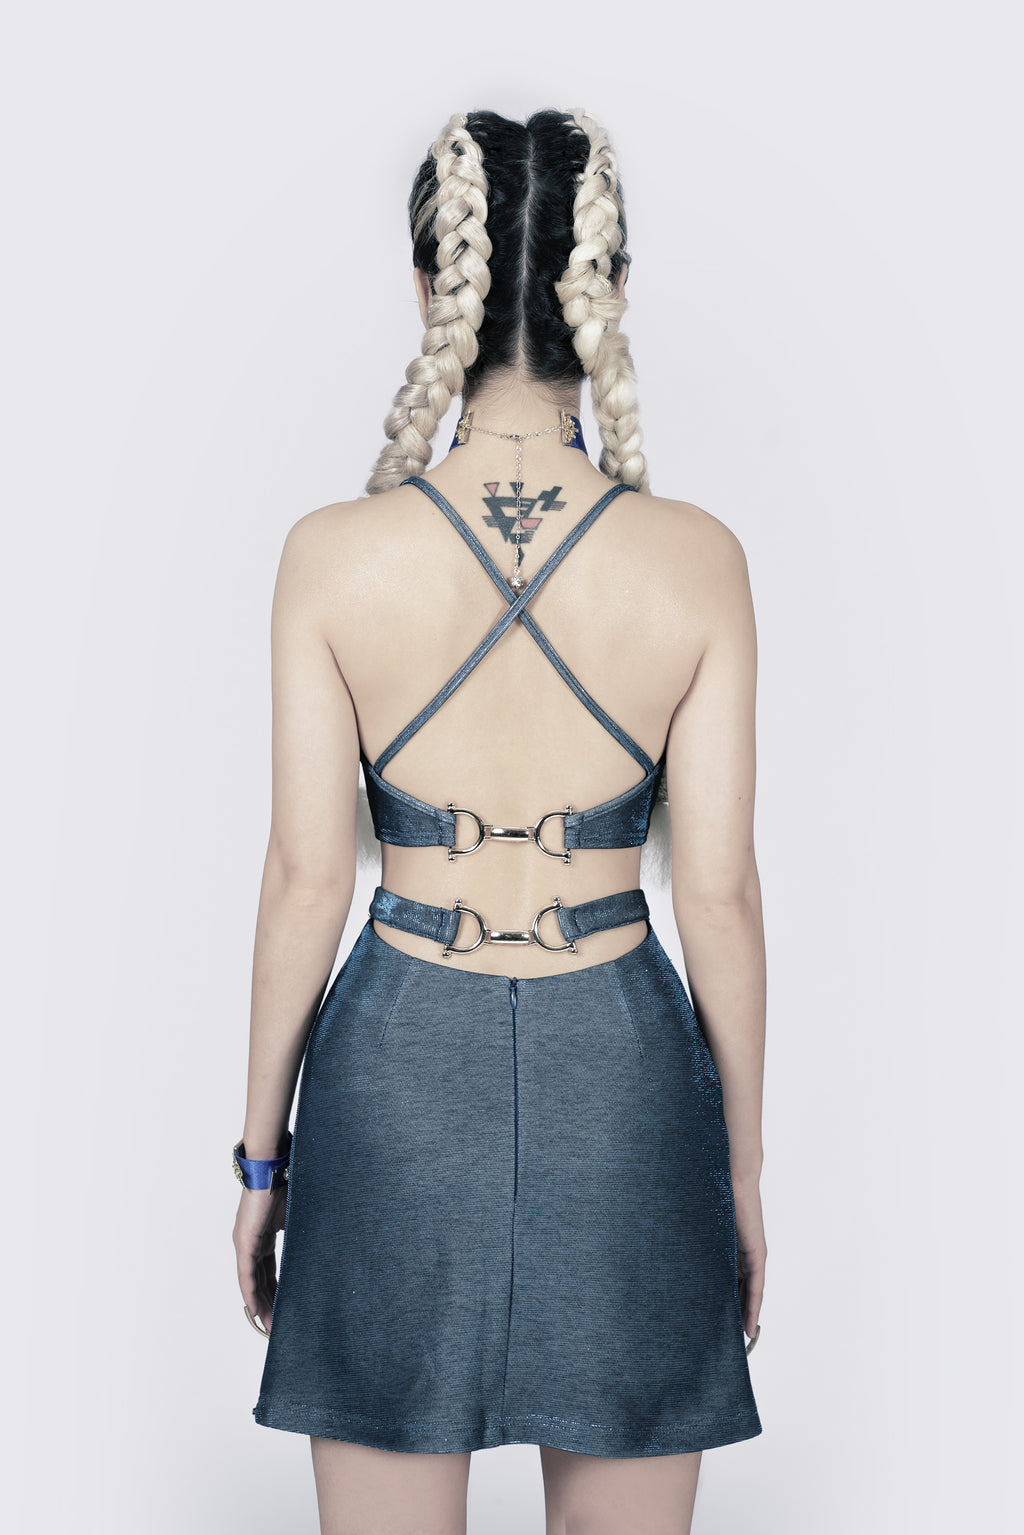 Lady Luck Cut-out Skirt